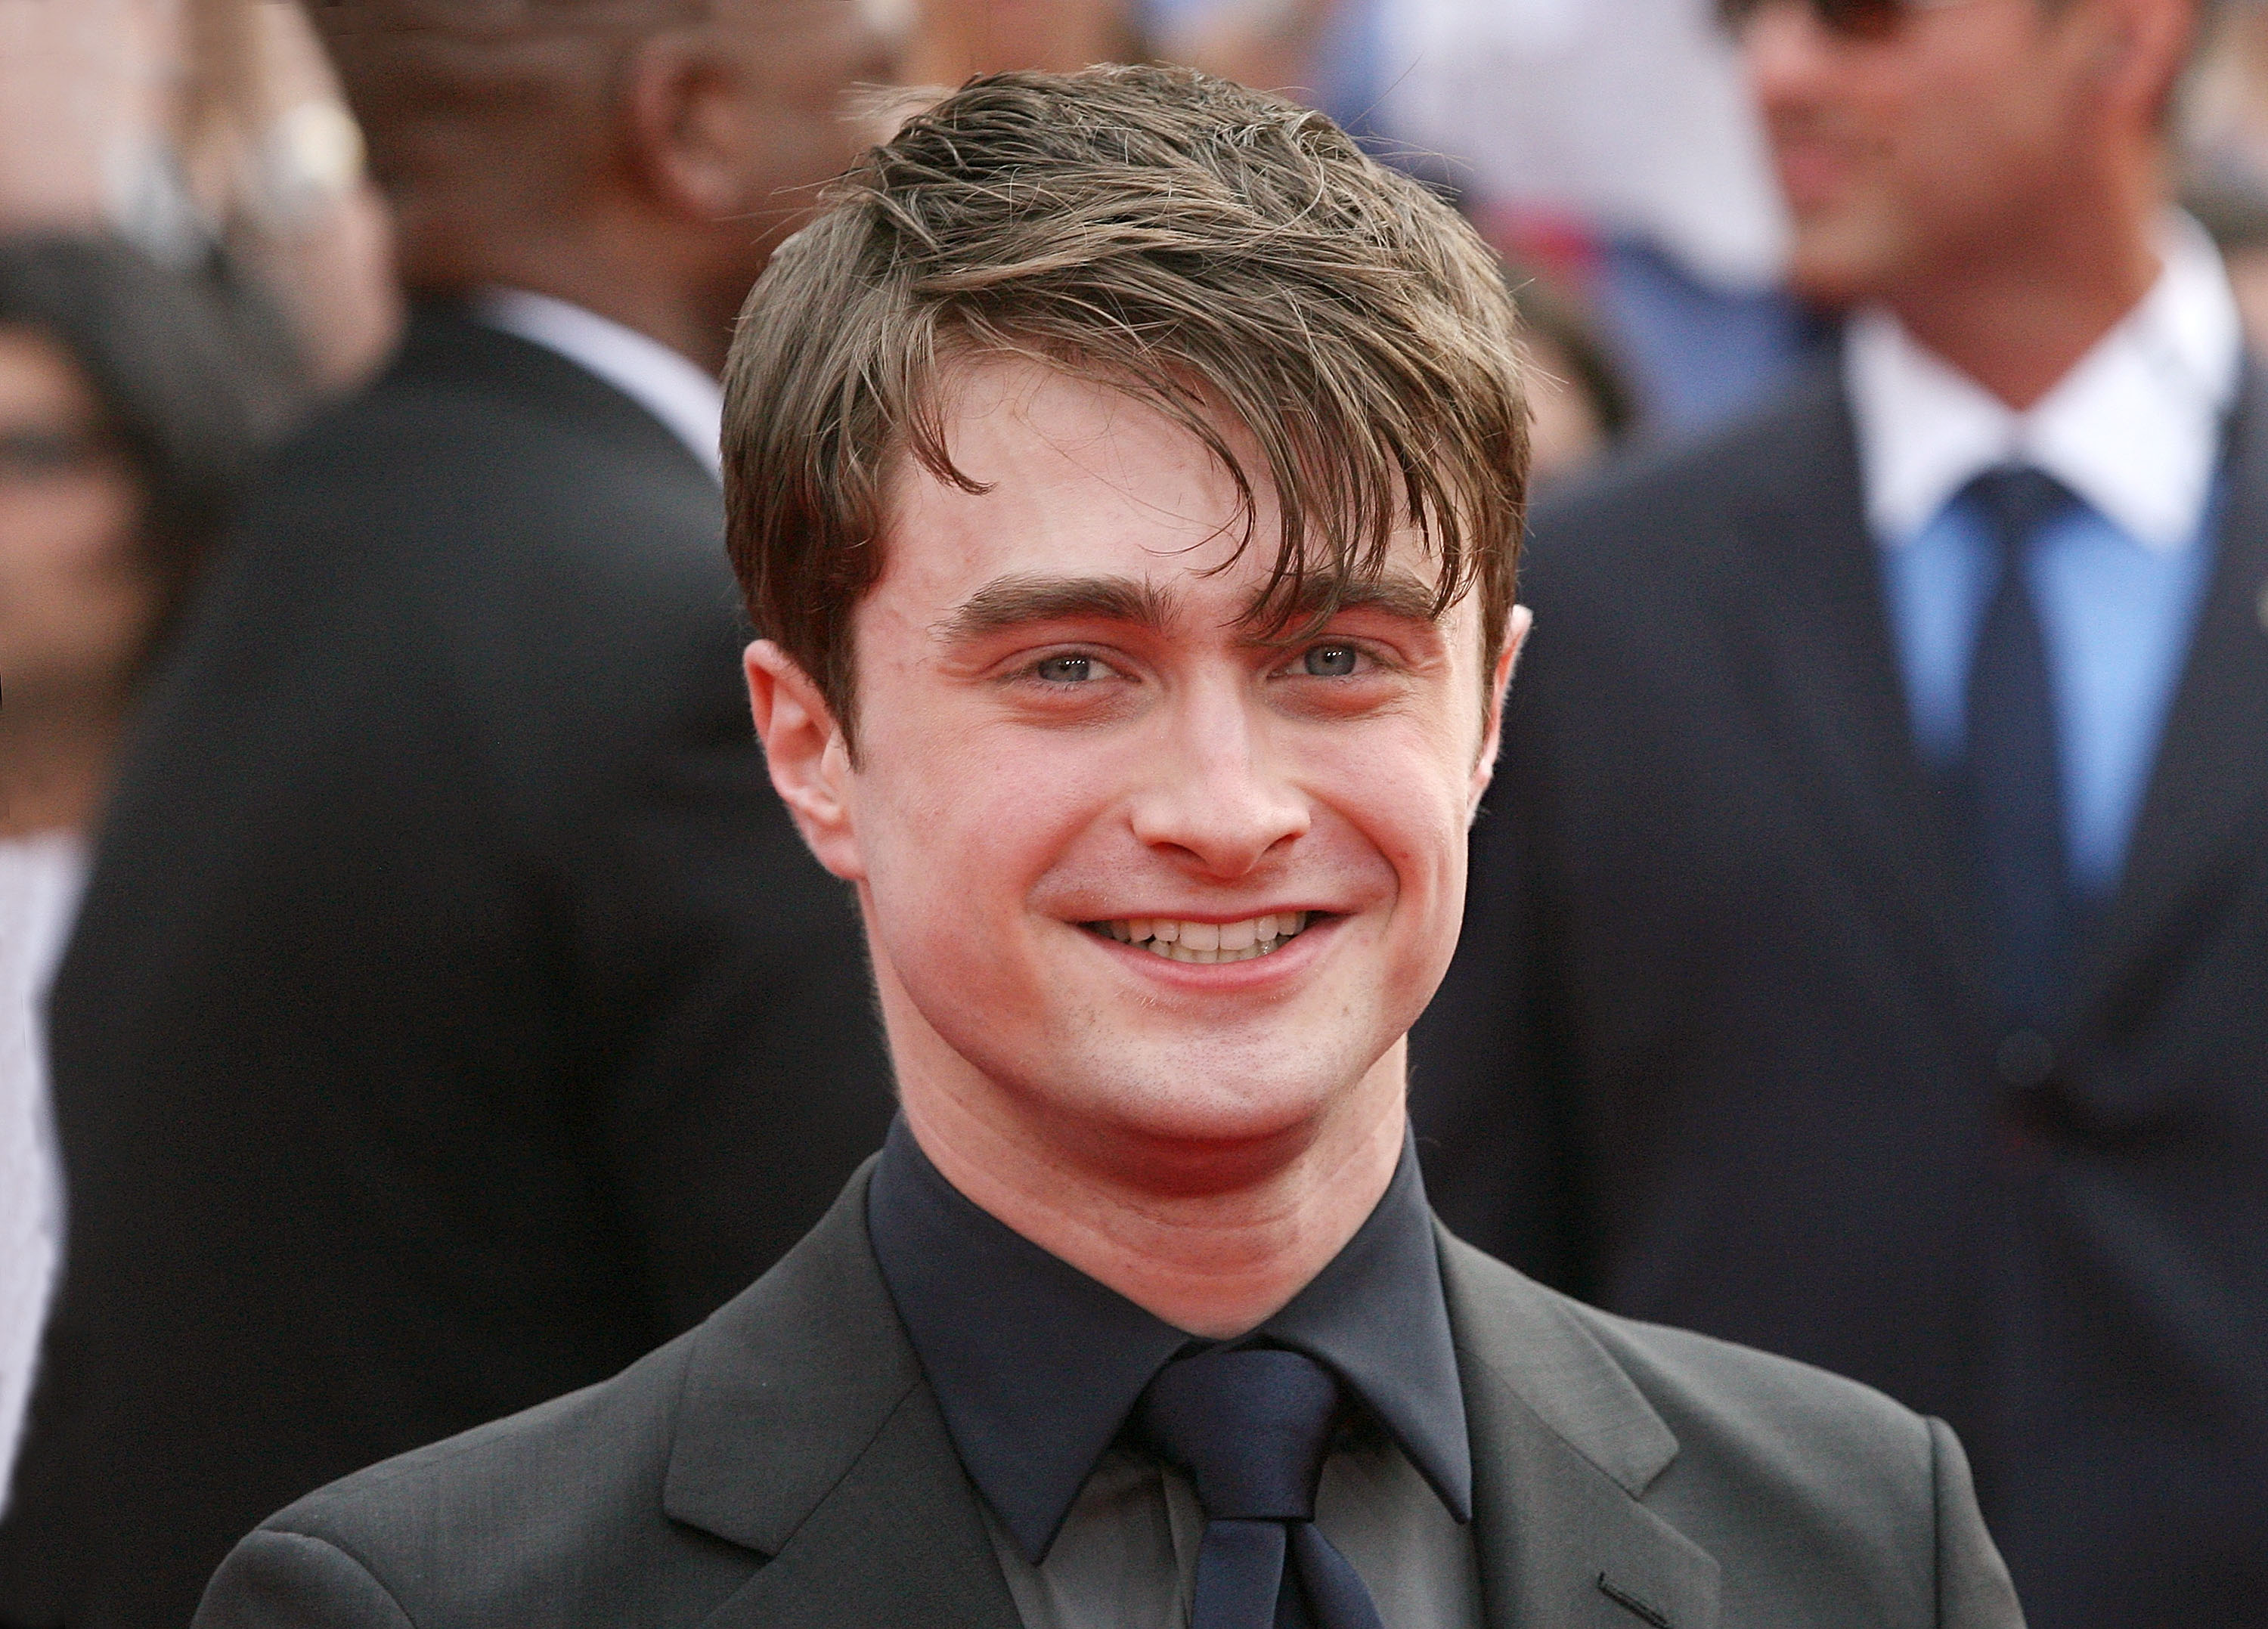 Daniel Radcliffe attends the premiere of the movie Harry Potter and the Deathly Hallows Part 2.